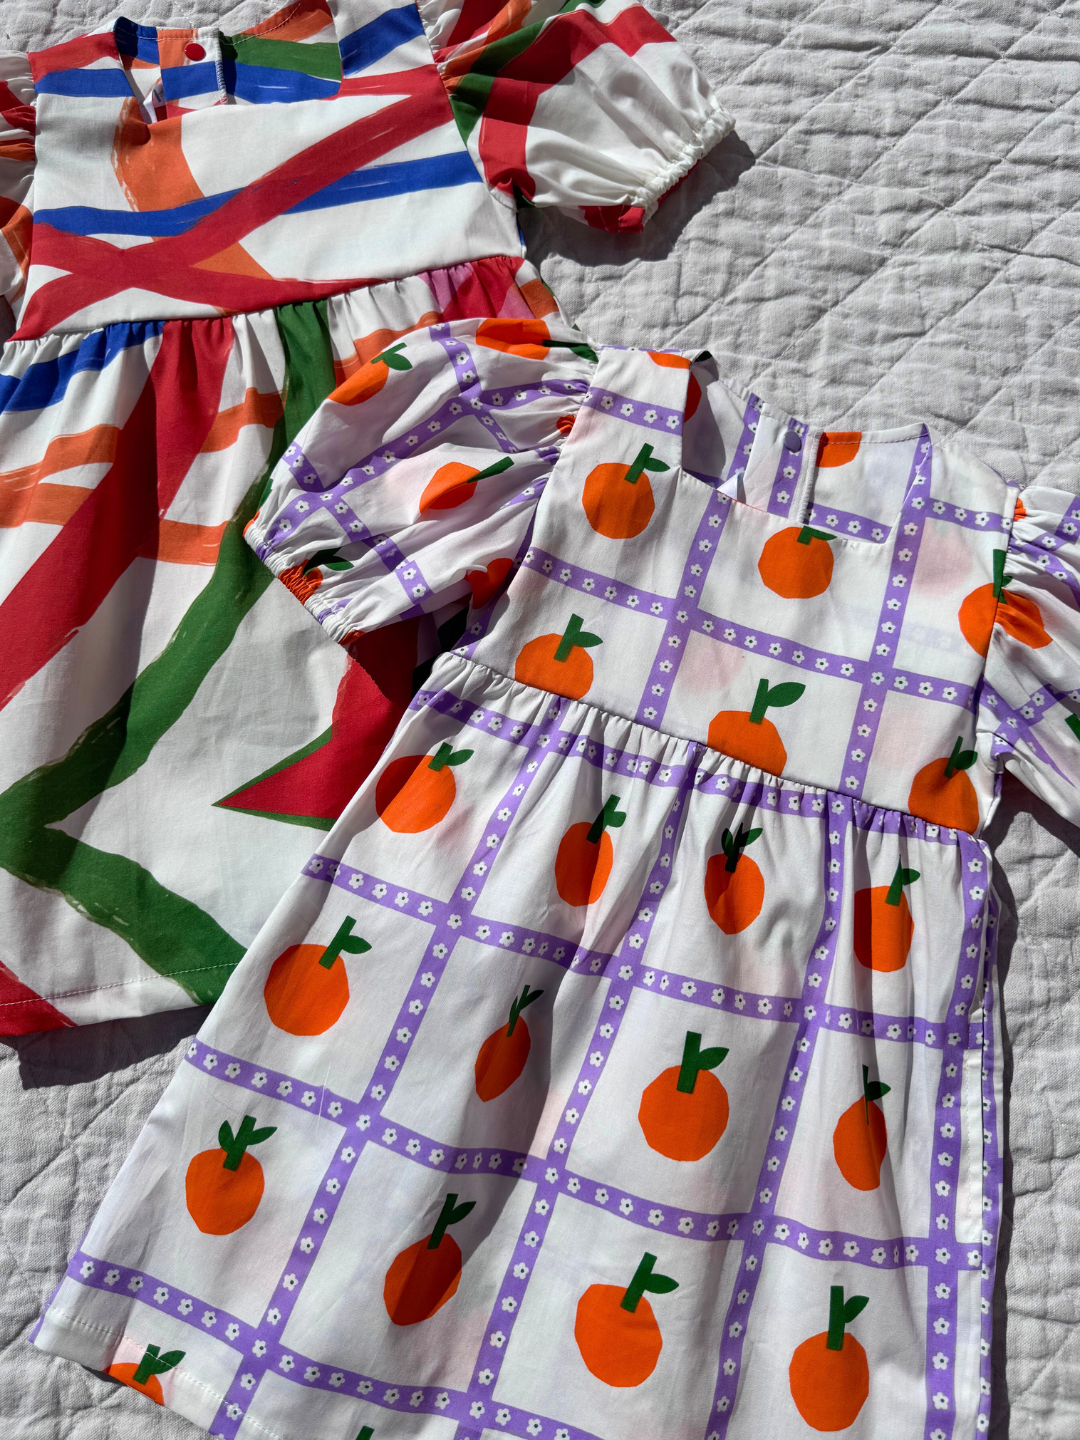 A close up of the kid's Glow dress with an all-over oranges print and colors print laid plat on quilt